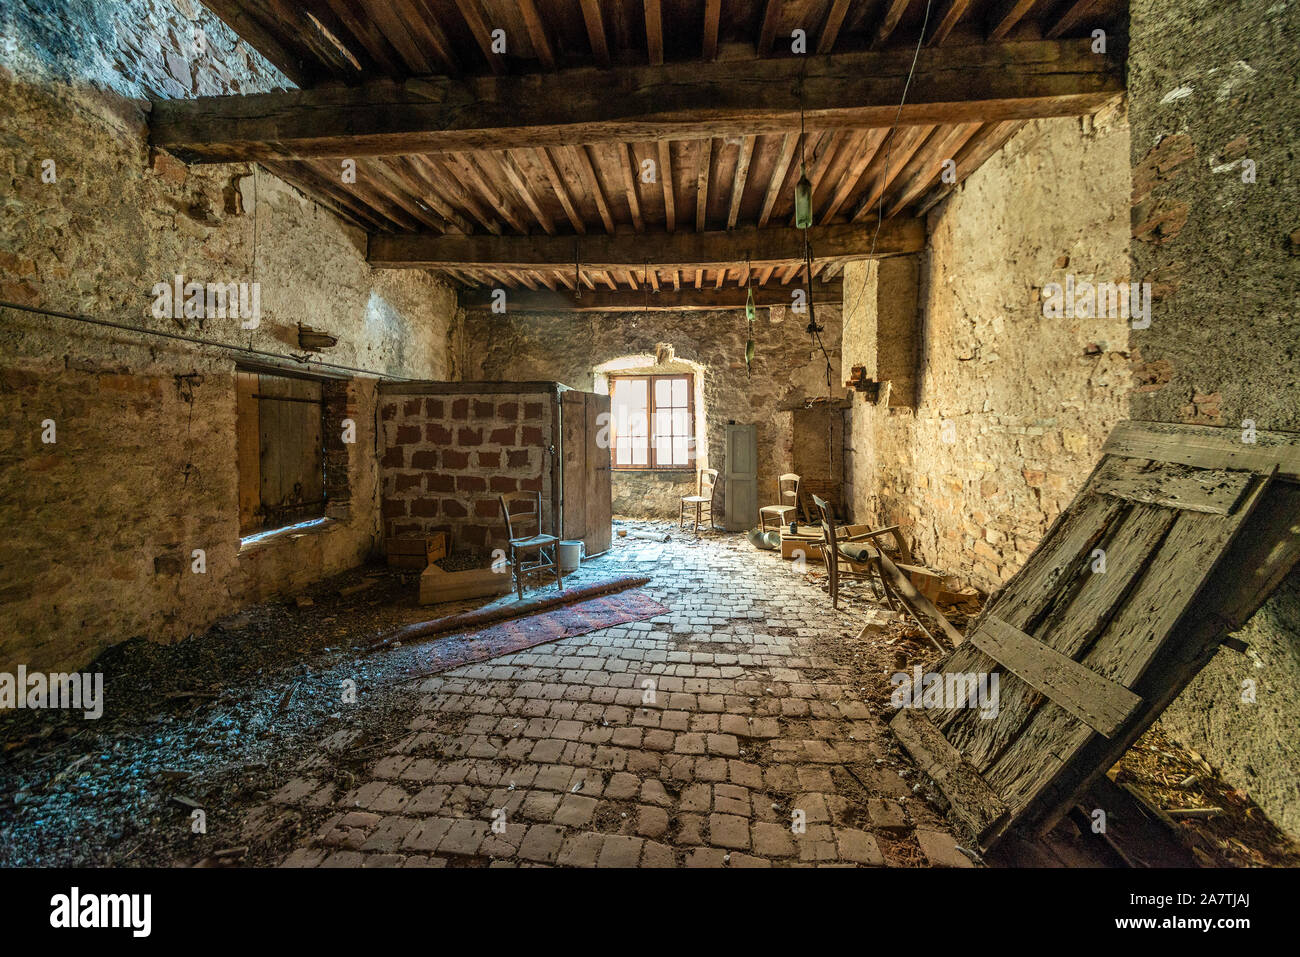 An abandoned, dust covered room in a French medieval house, with intact wooden beams and floor tiles, illuminated by natural window light. Stock Photo